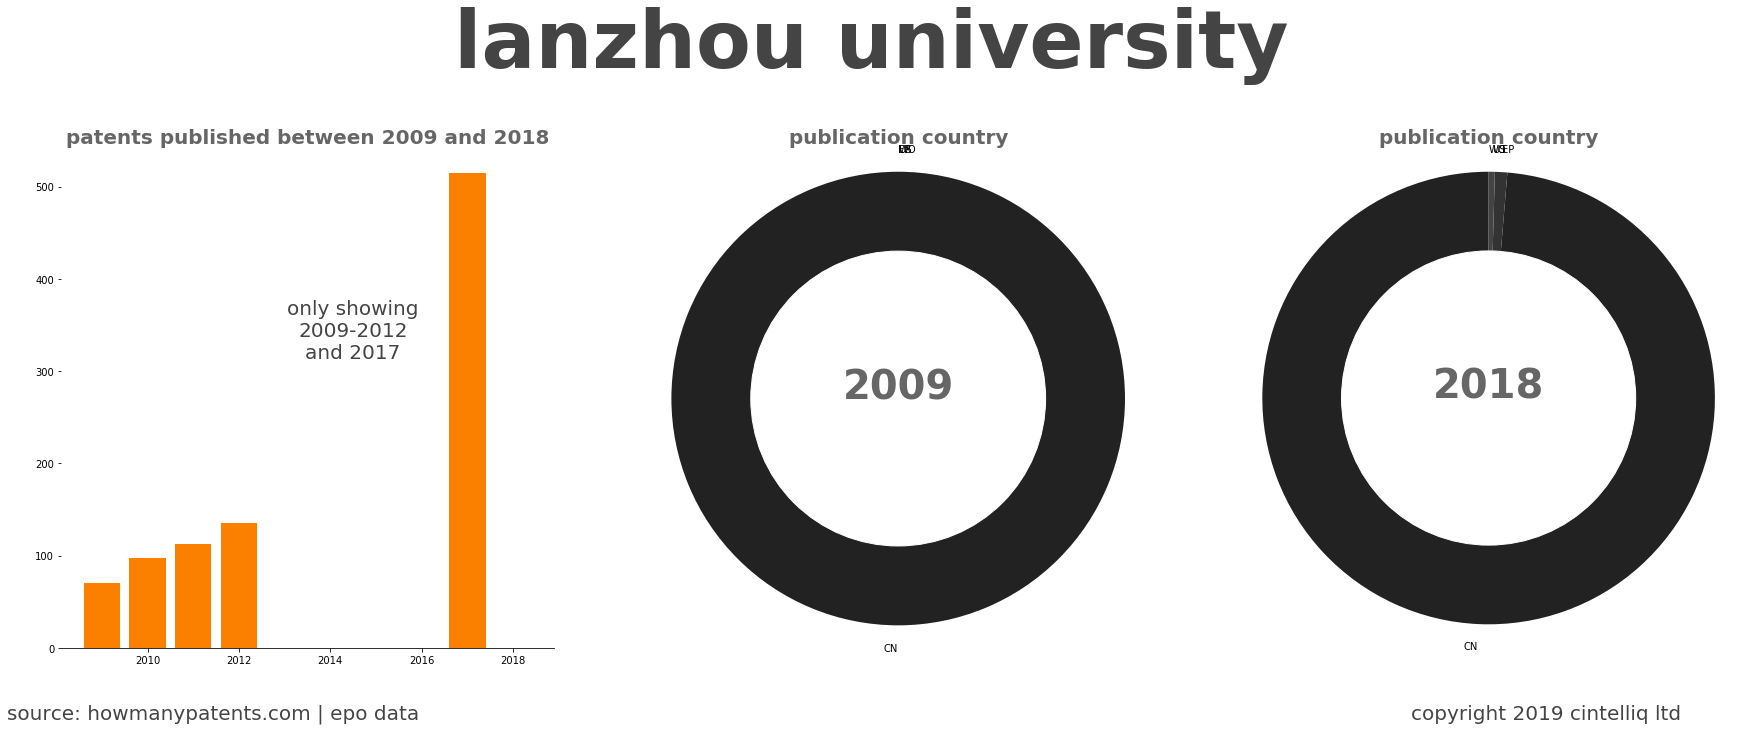 summary of patents for Lanzhou University